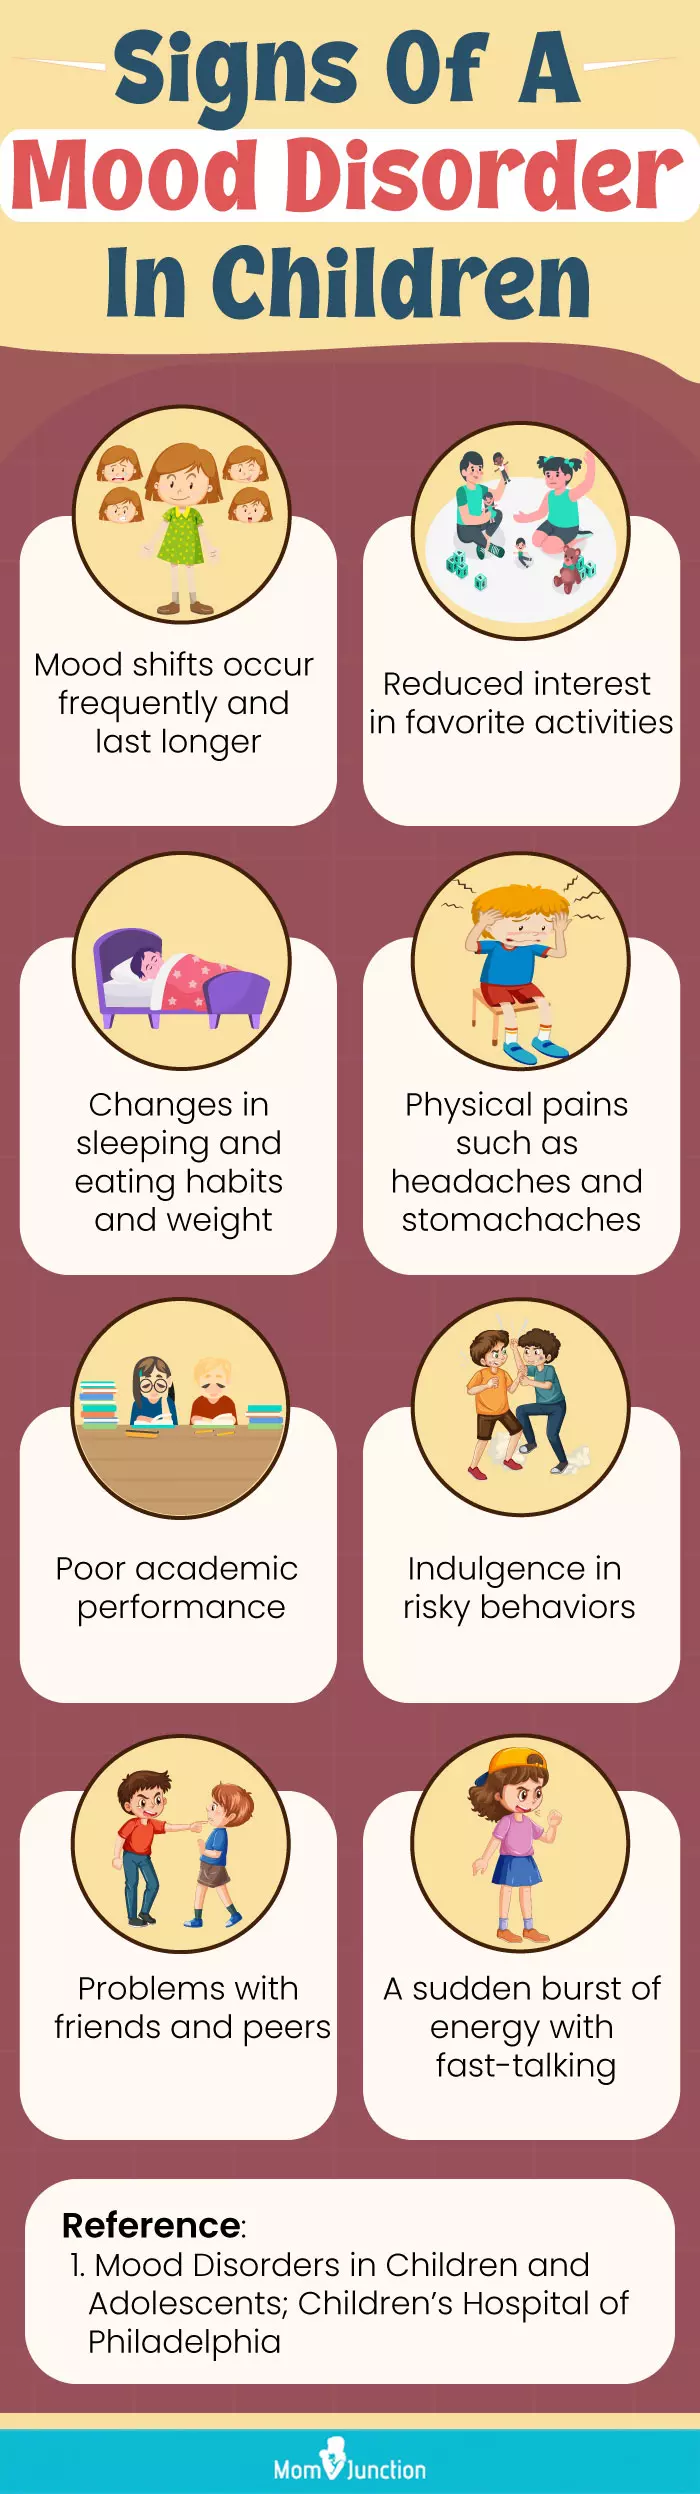 signs of a mood disorder in children (infographic)